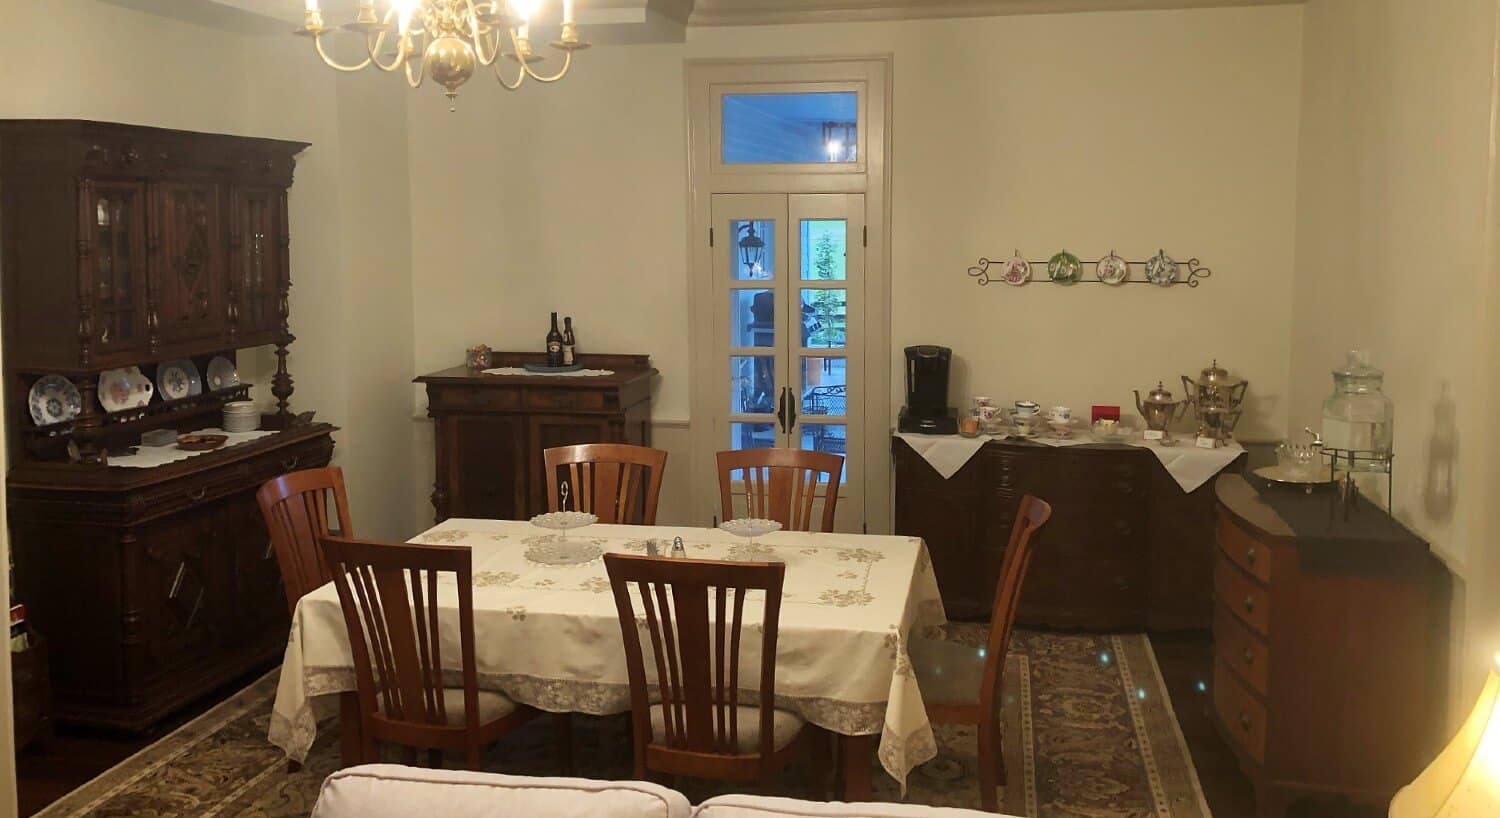 Dining area with white walls and dark wood table set for six, hutch and three buffet tables